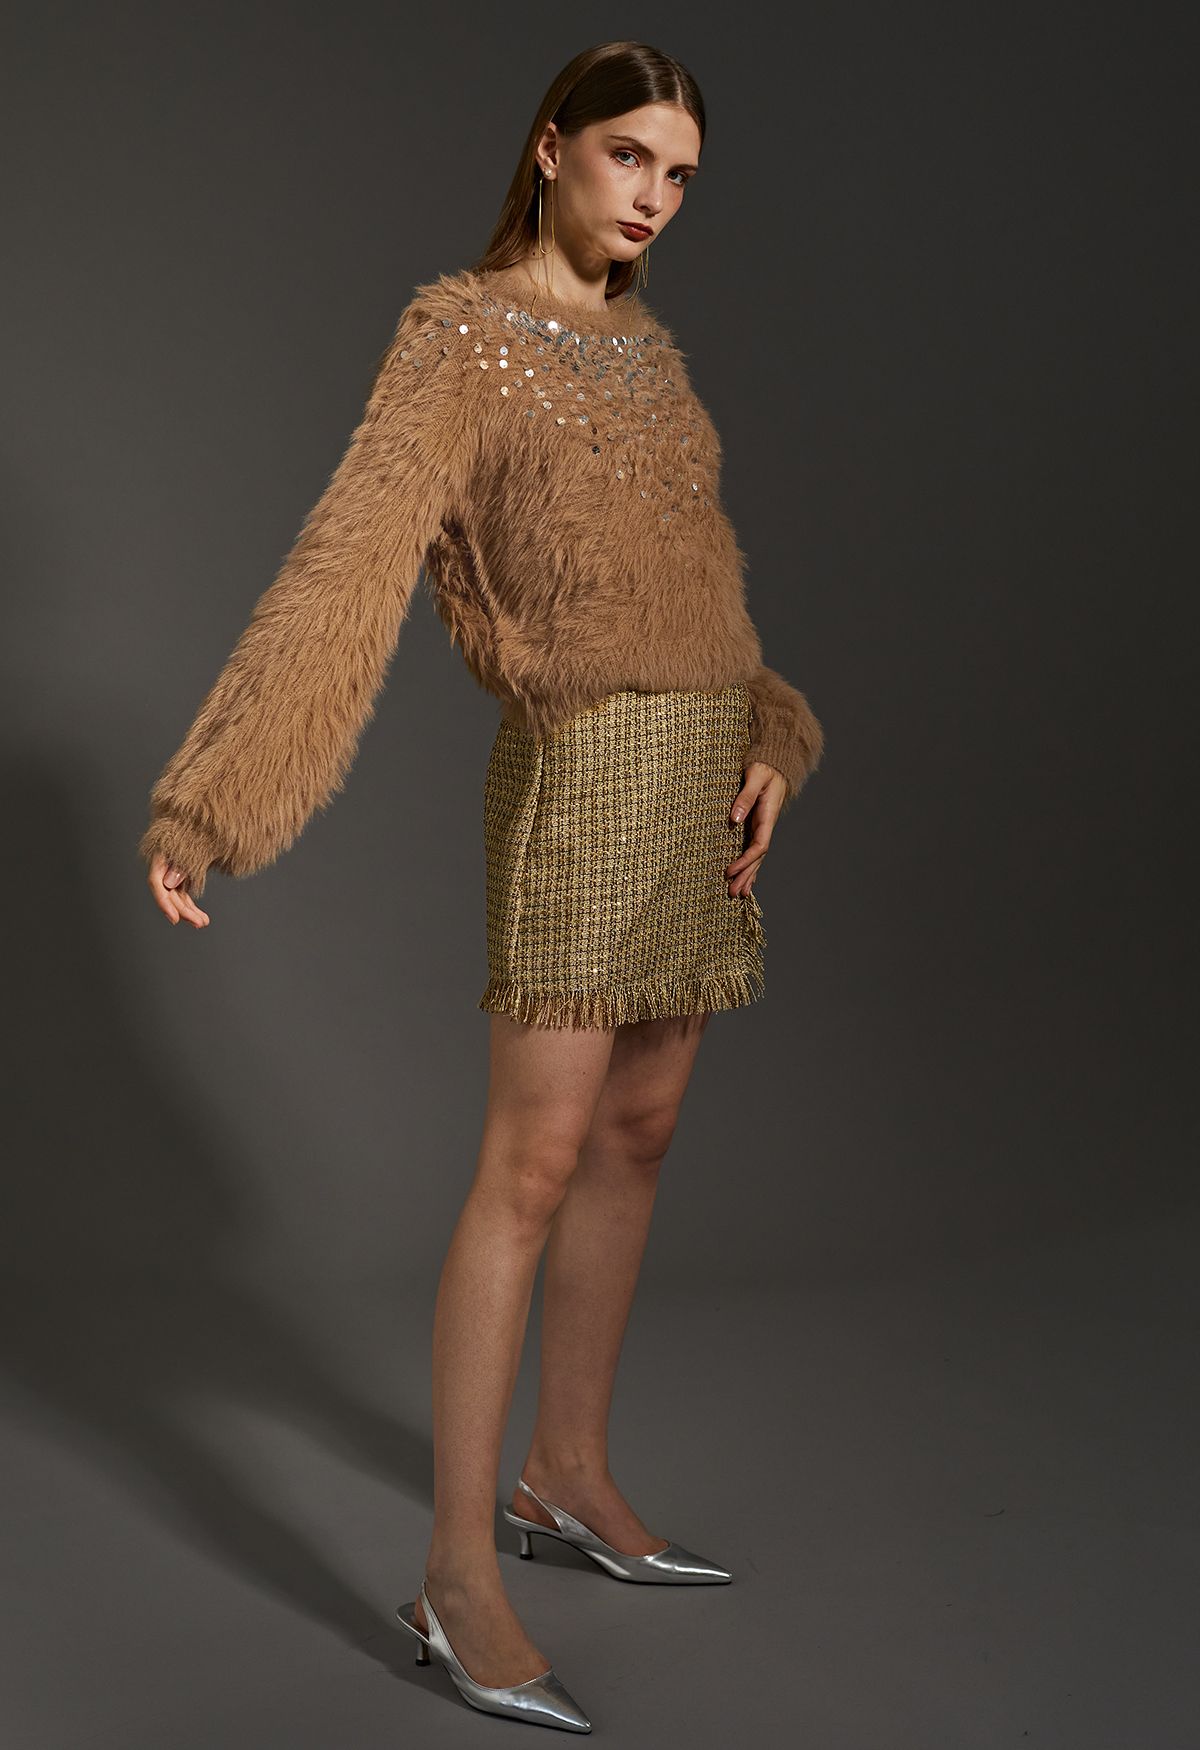 Fluffy Silver Sequins Knit Sweater in Tan